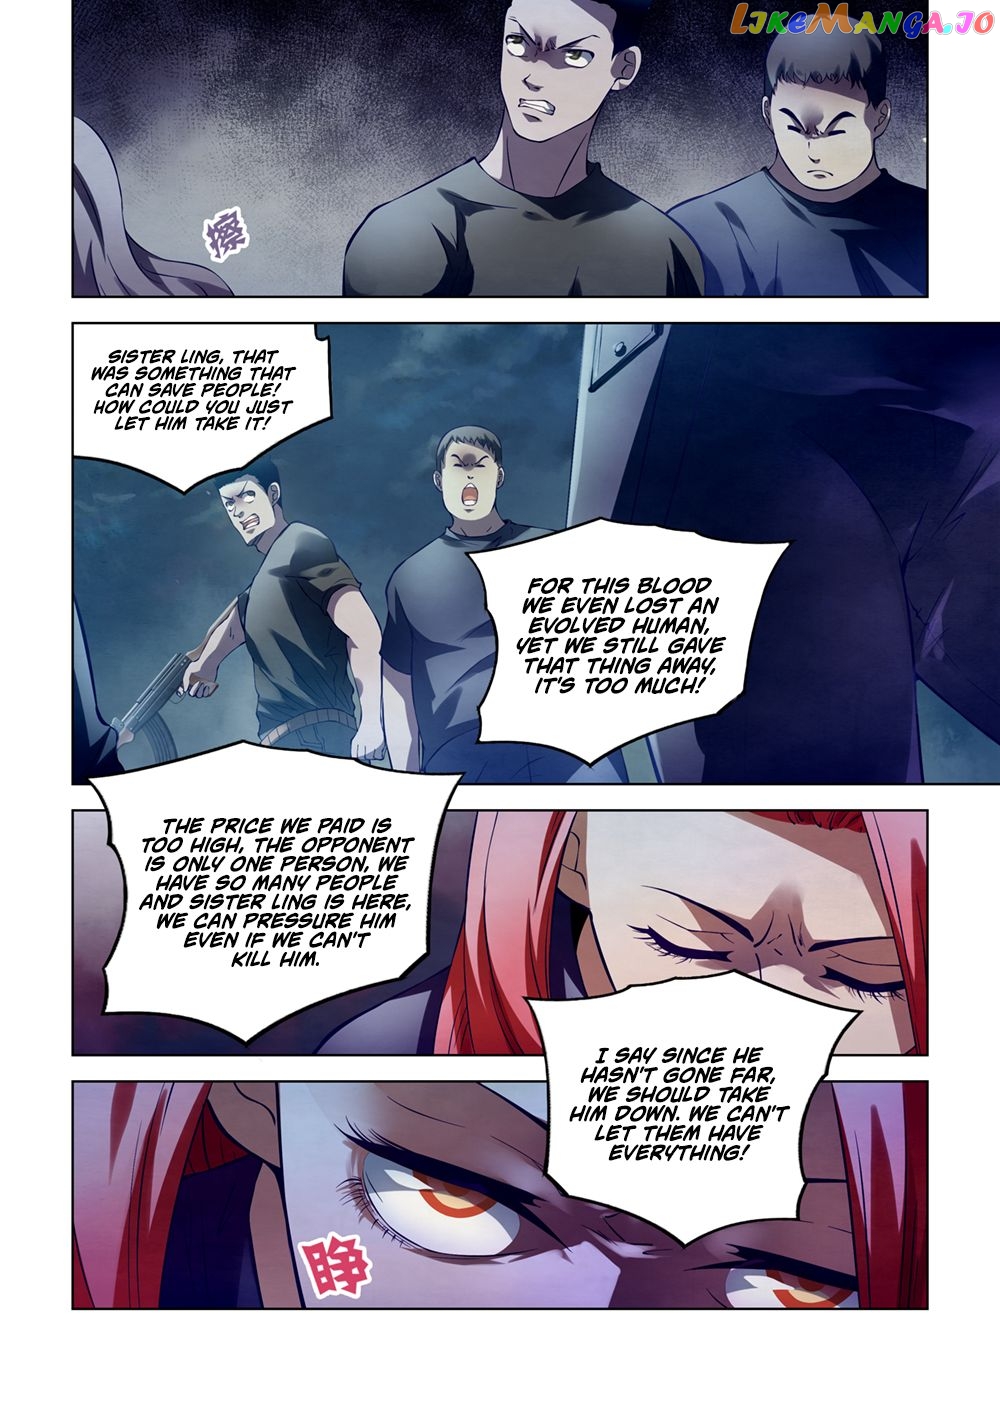 The Last Human Chapter 135 - page 3